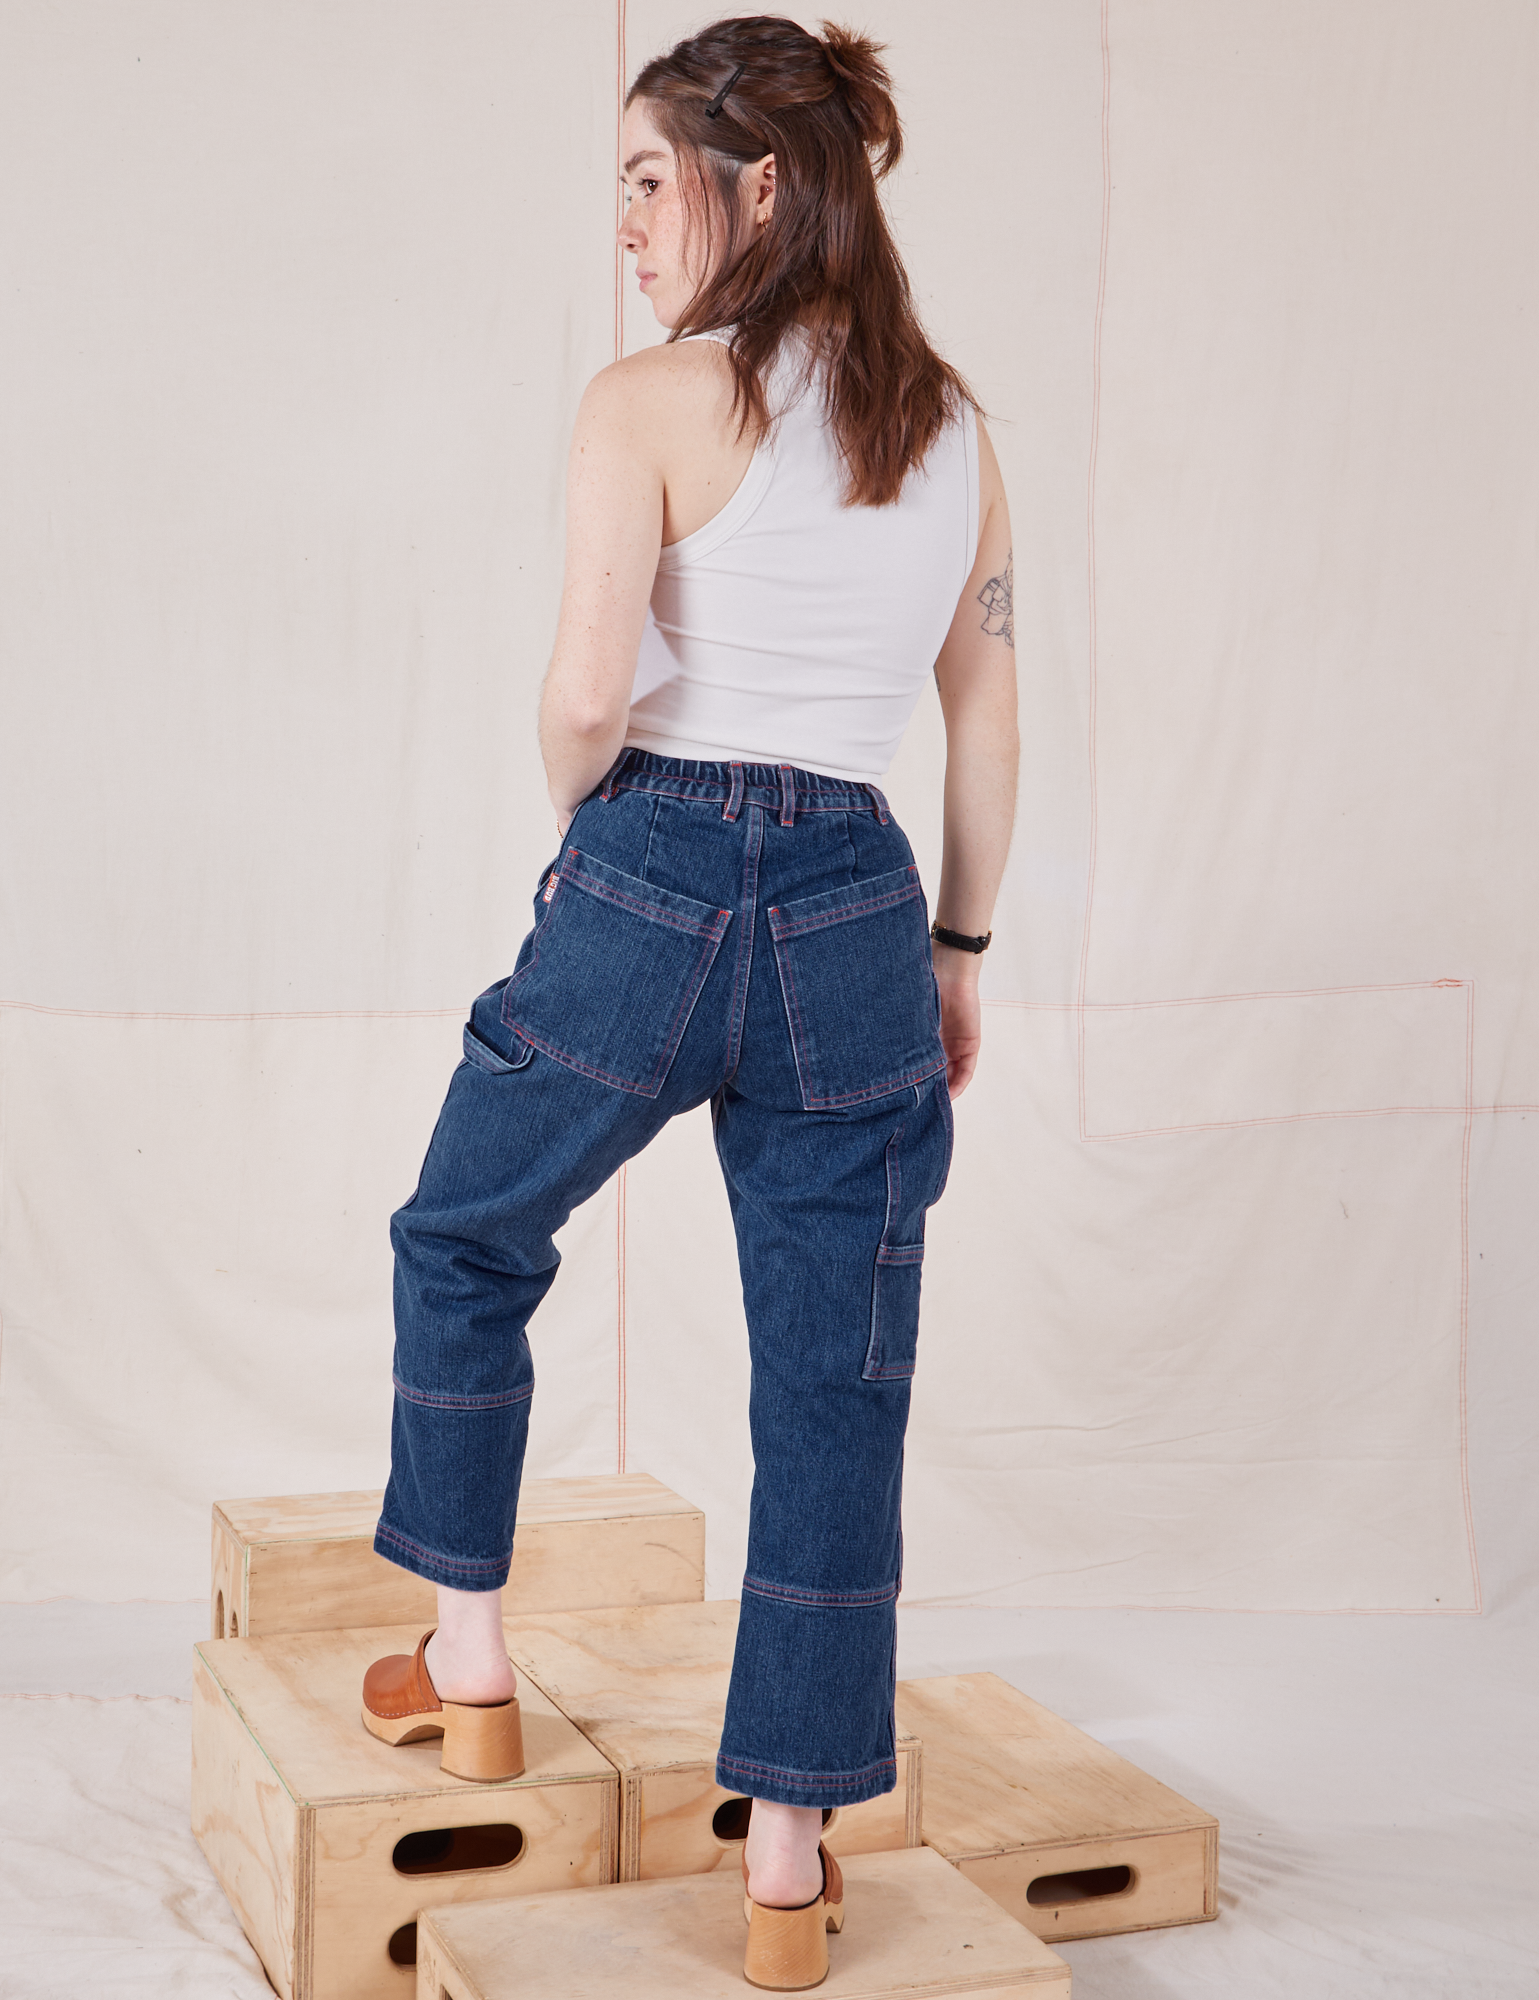 Back view of Petite Carpenter Jeans in Dark Wash and vintage off-white Tank Top on Hana